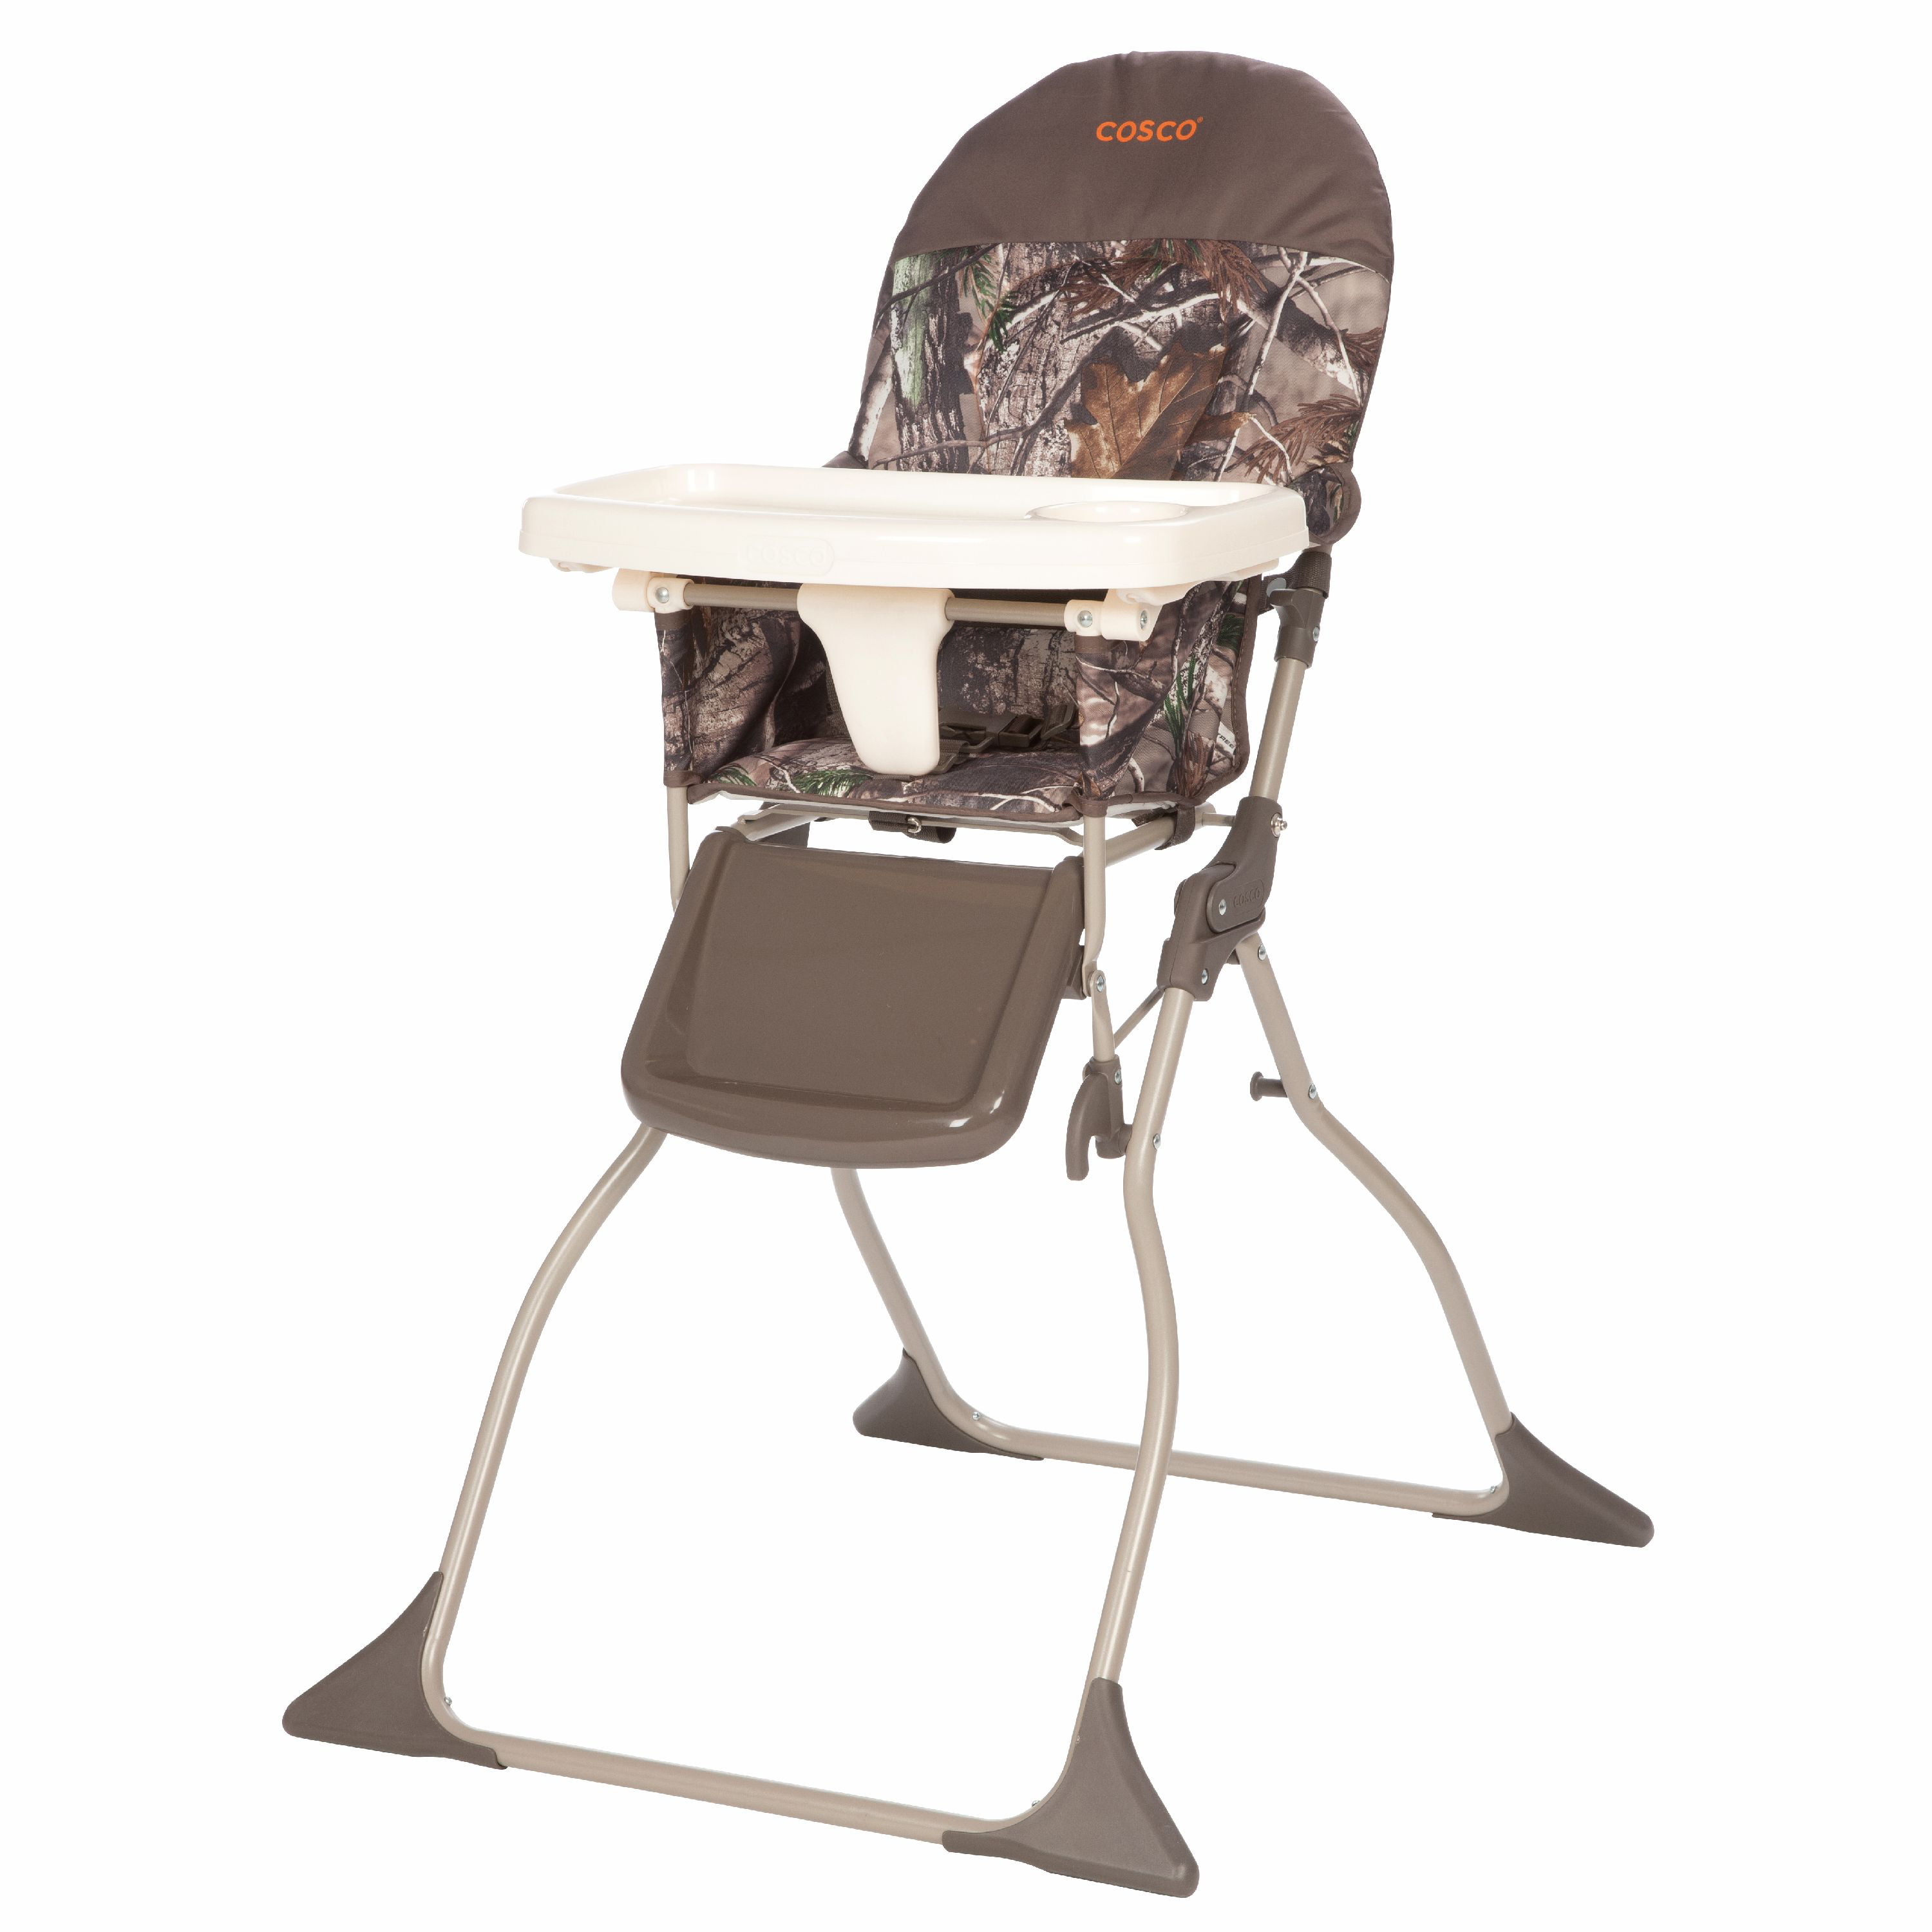 Cosco Baby Toddler High Chair Folding Portable Kid Eat Padded Seat